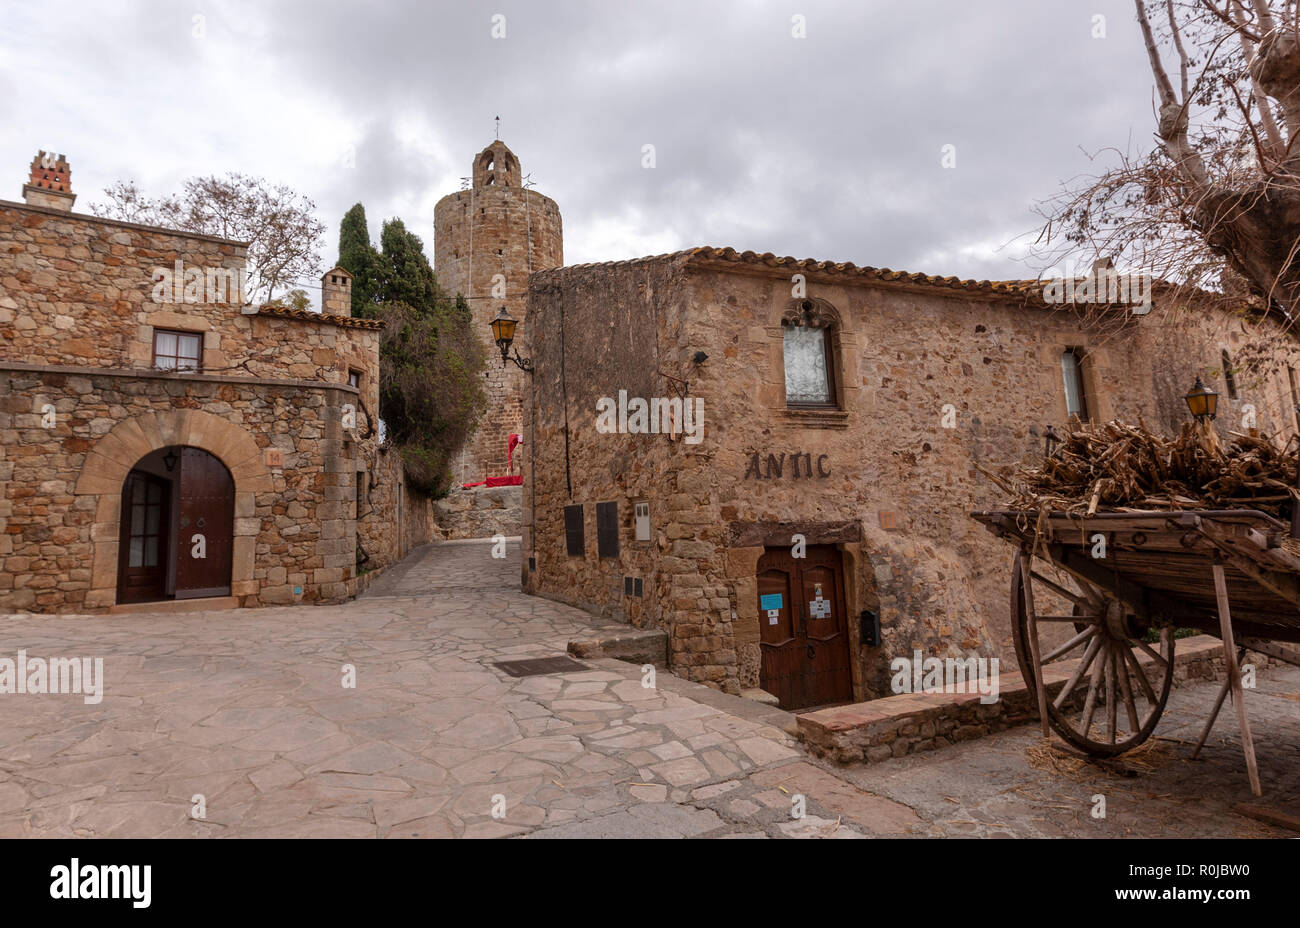 Pals a medieval town with stone houses and a medieval Romanesque tower in Girona Province, Catalonia, Spain Stock Photo